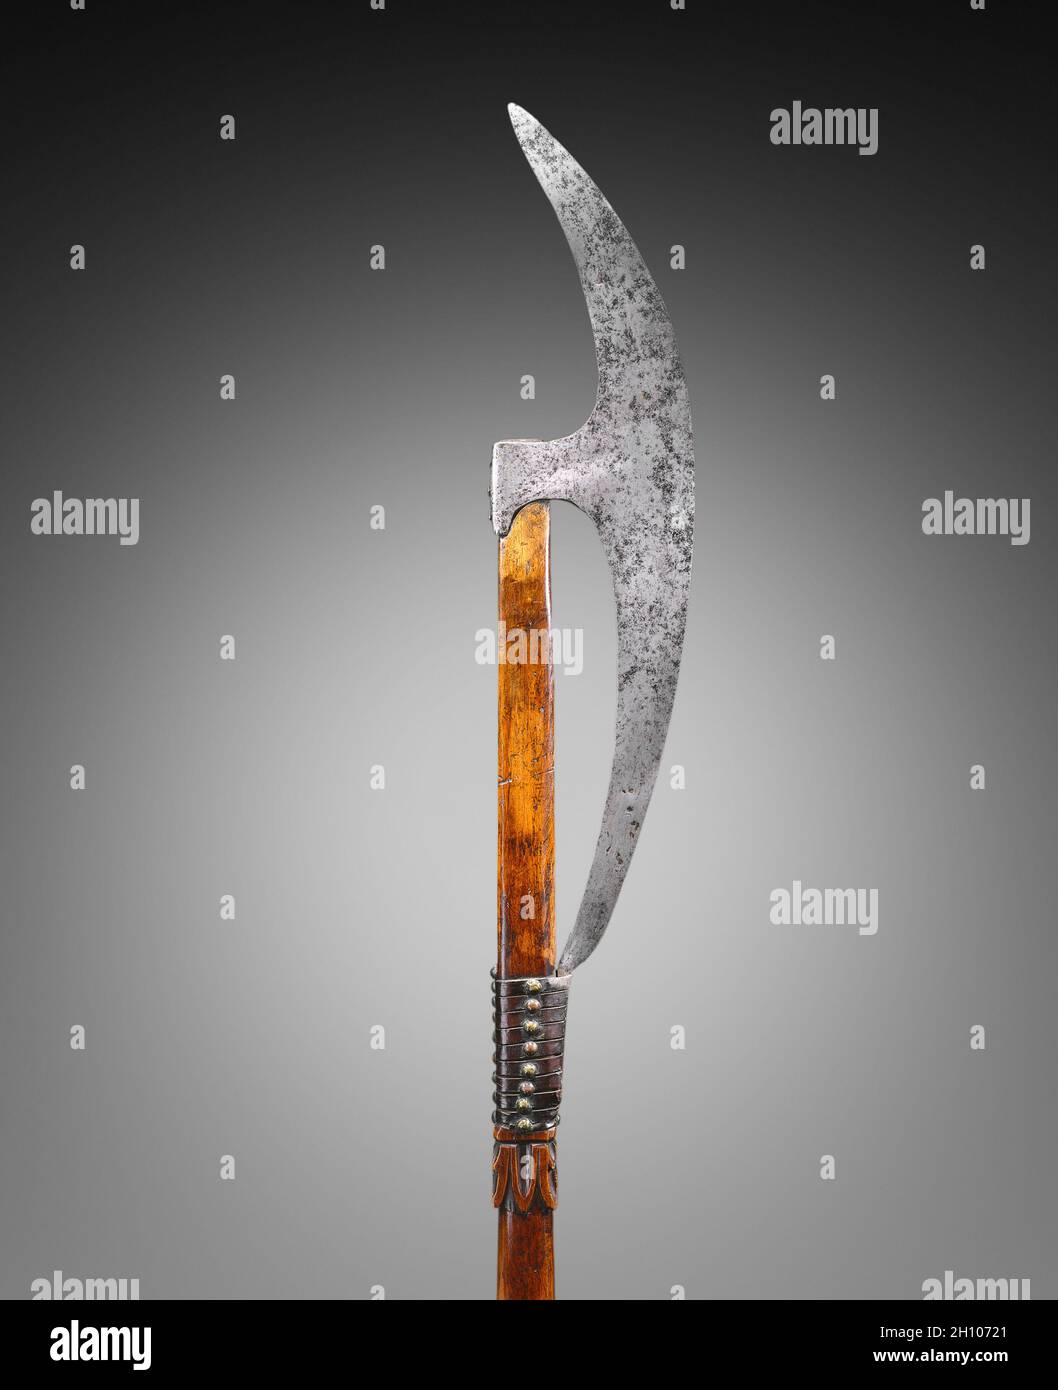 Bardiche (Pole Axe), 1500s. Germany or Russia, 16th century. Steel, leather, brass; wood haft; overall: 178.5 cm (70 1/4 in.); blade: 14.2 cm (5 9/16 in.). Stock Photo